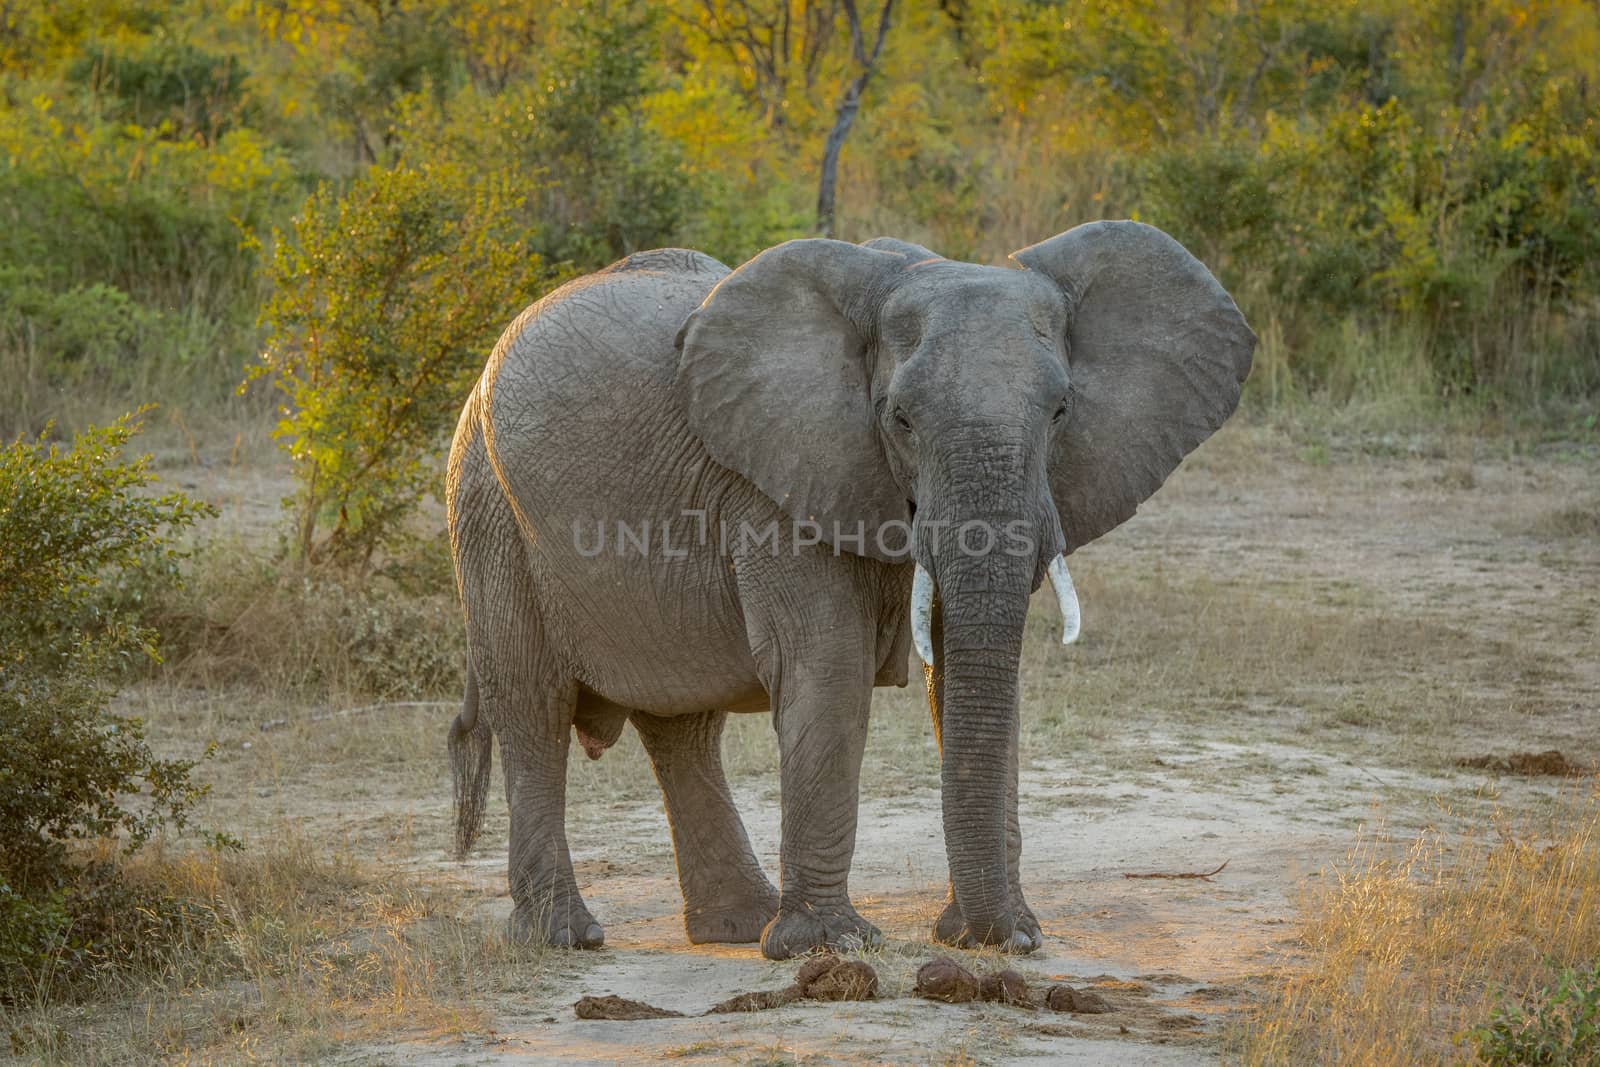 Big Elephant starring in the Kruger. by Simoneemanphotography